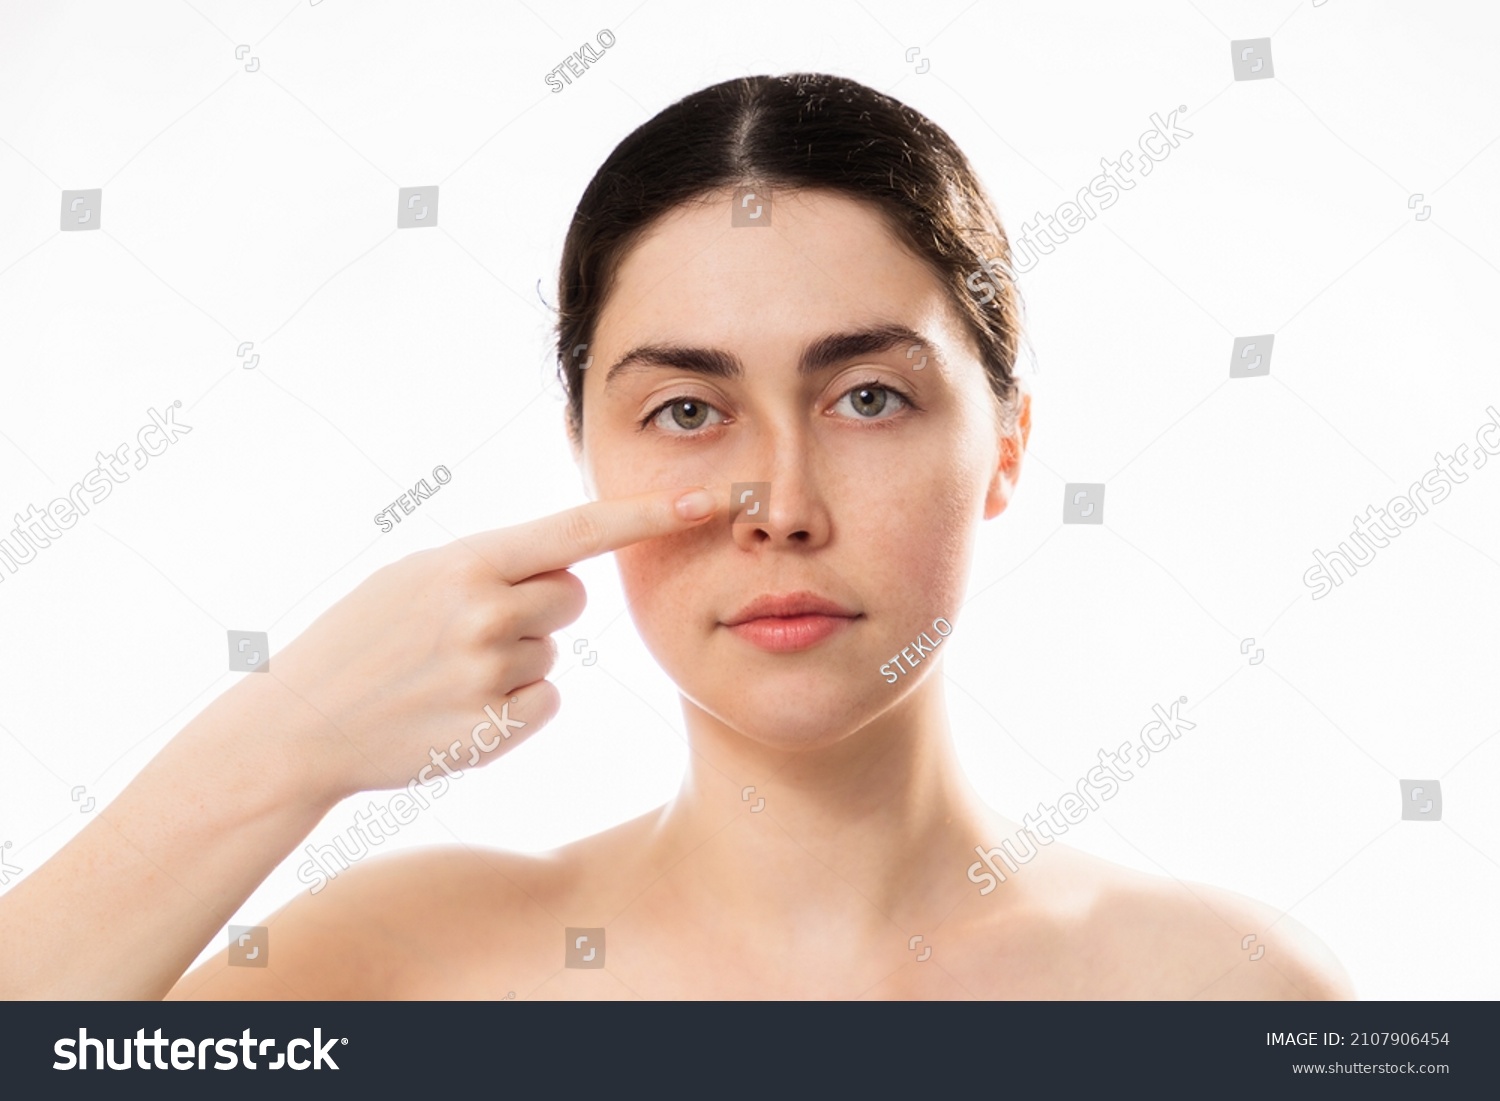 Plastic nose surgery. Portrait of young caucasian woman point her crooked bridge of the nose isolated on white background. Copy space. Concept of rhinoplasty. #2107906454